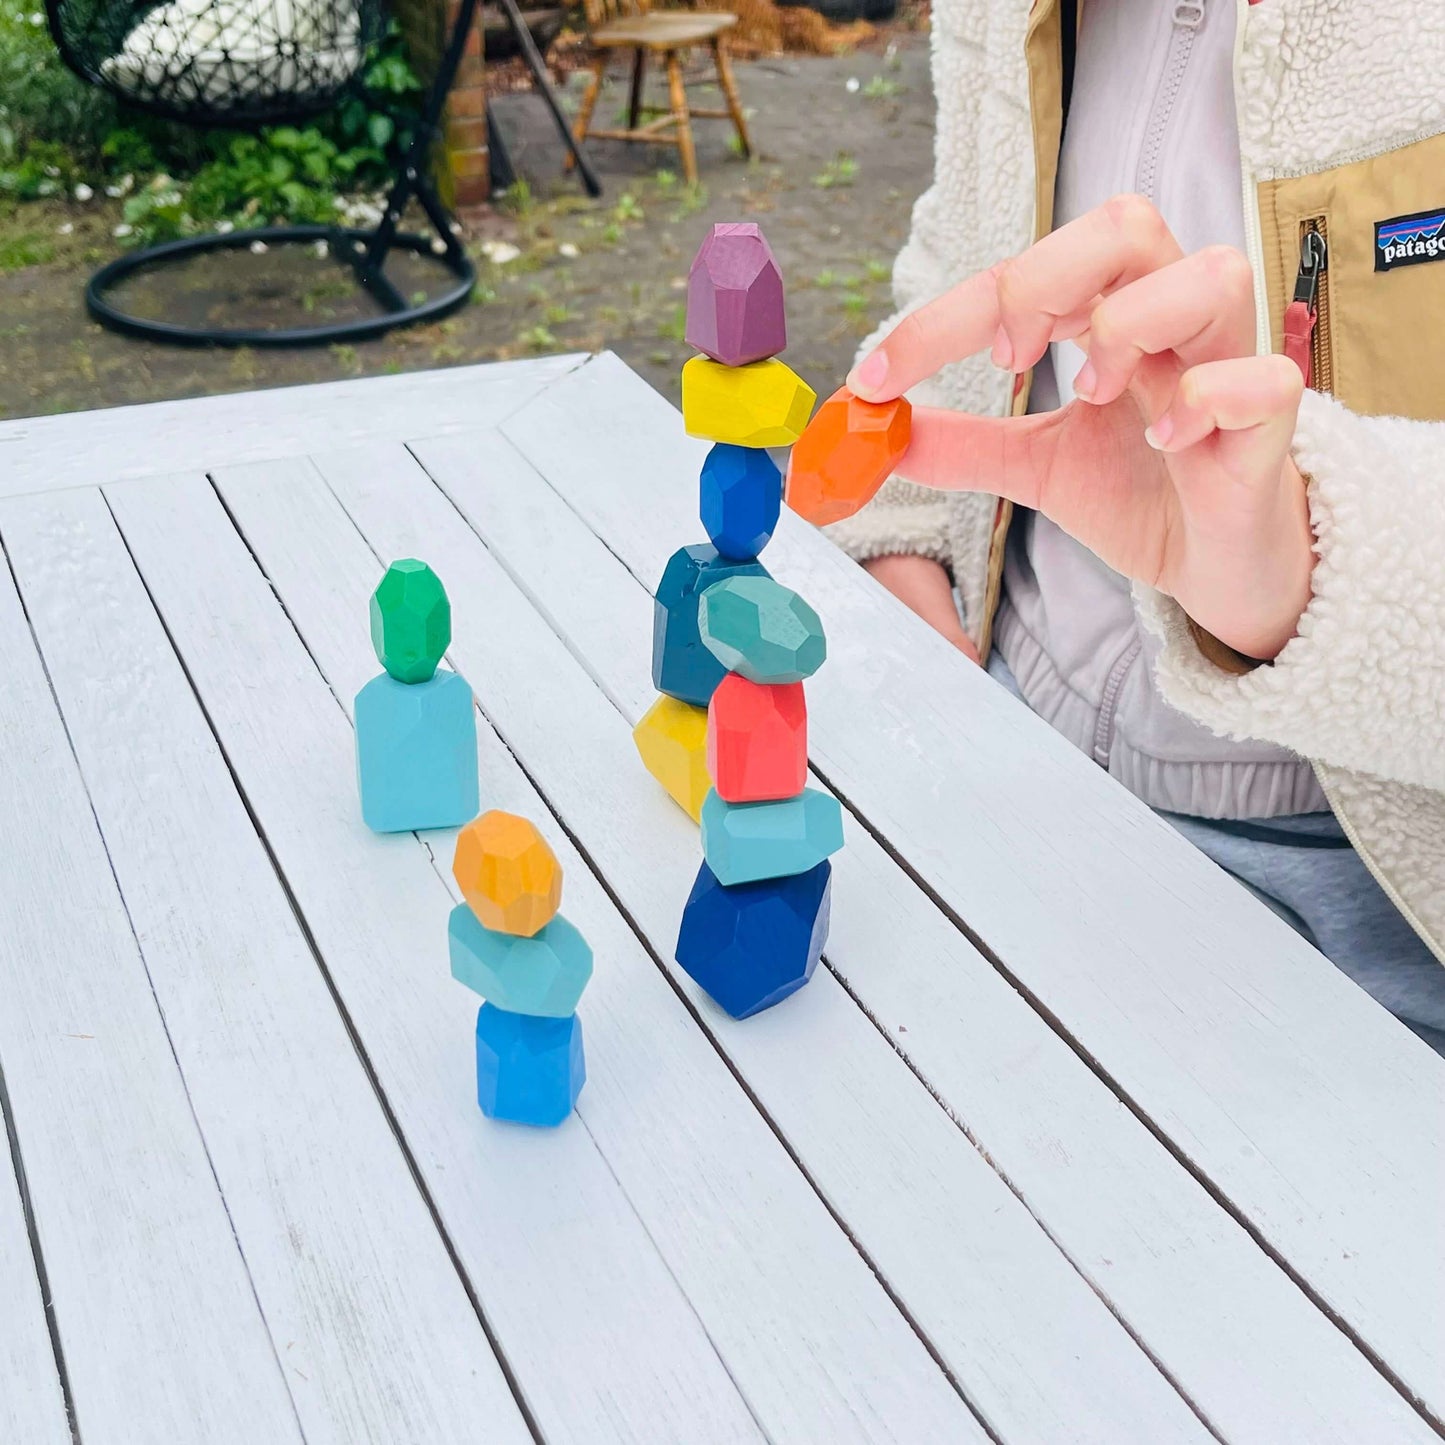 Child playing with colourful wooden balancing gems.